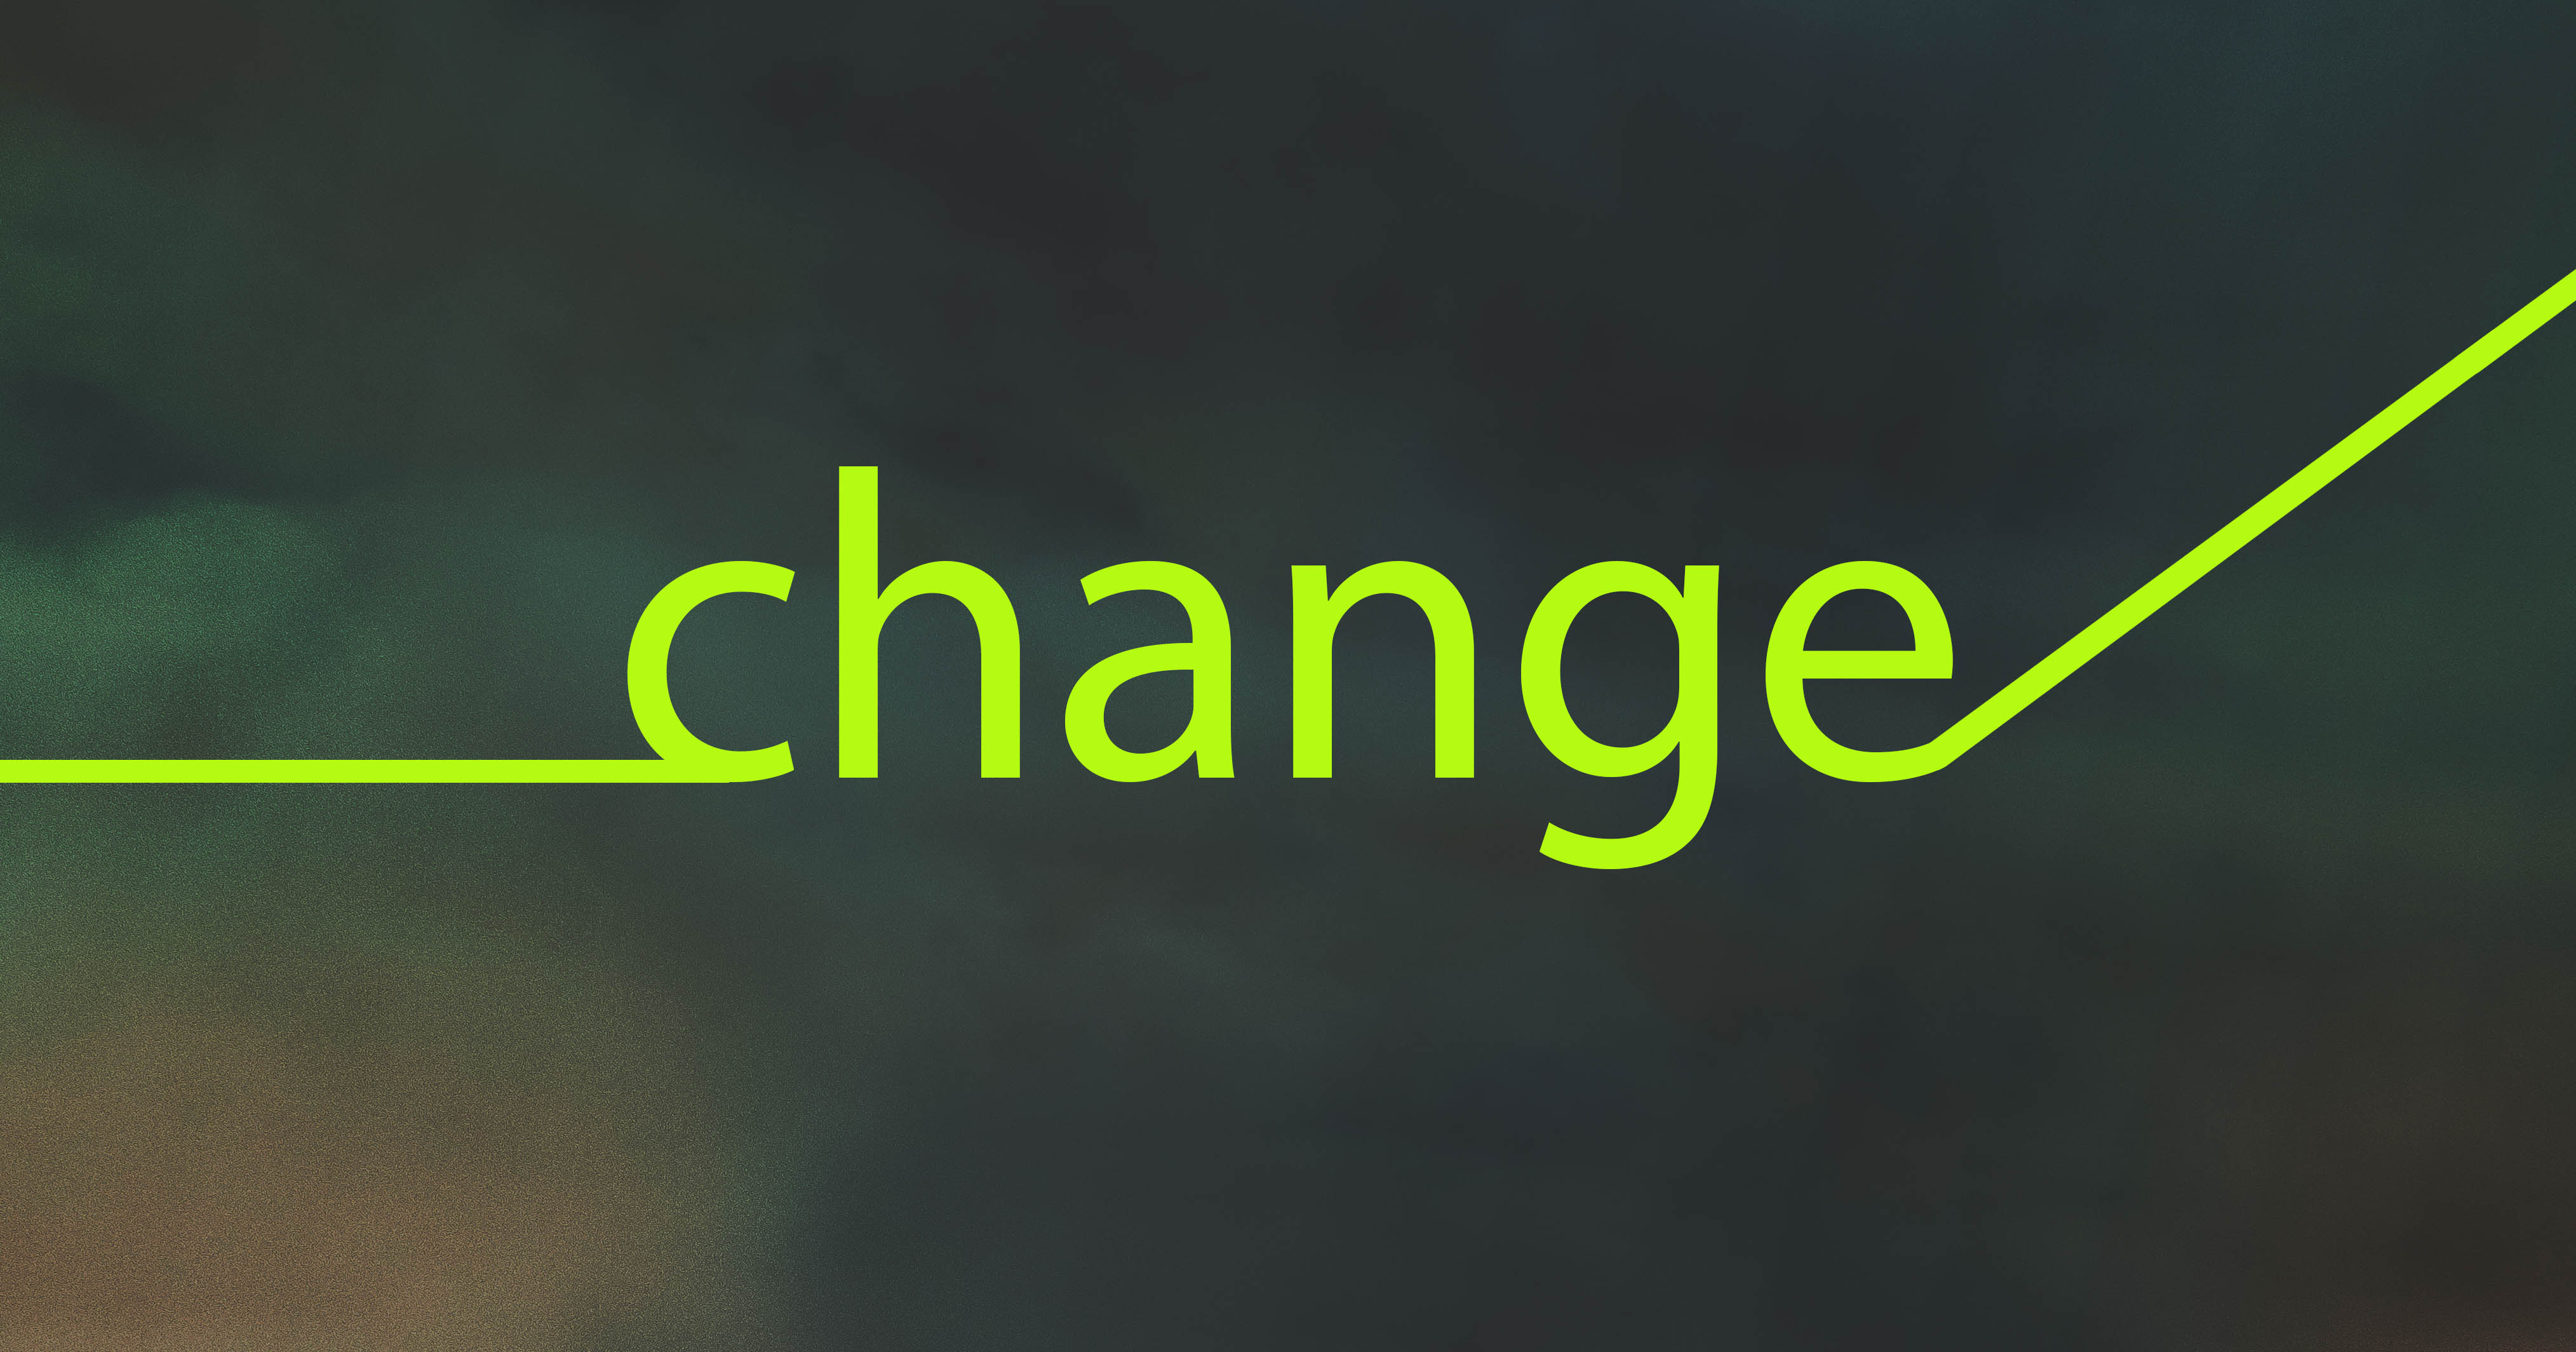 Graphic depicting the word 'Change' in bright green.